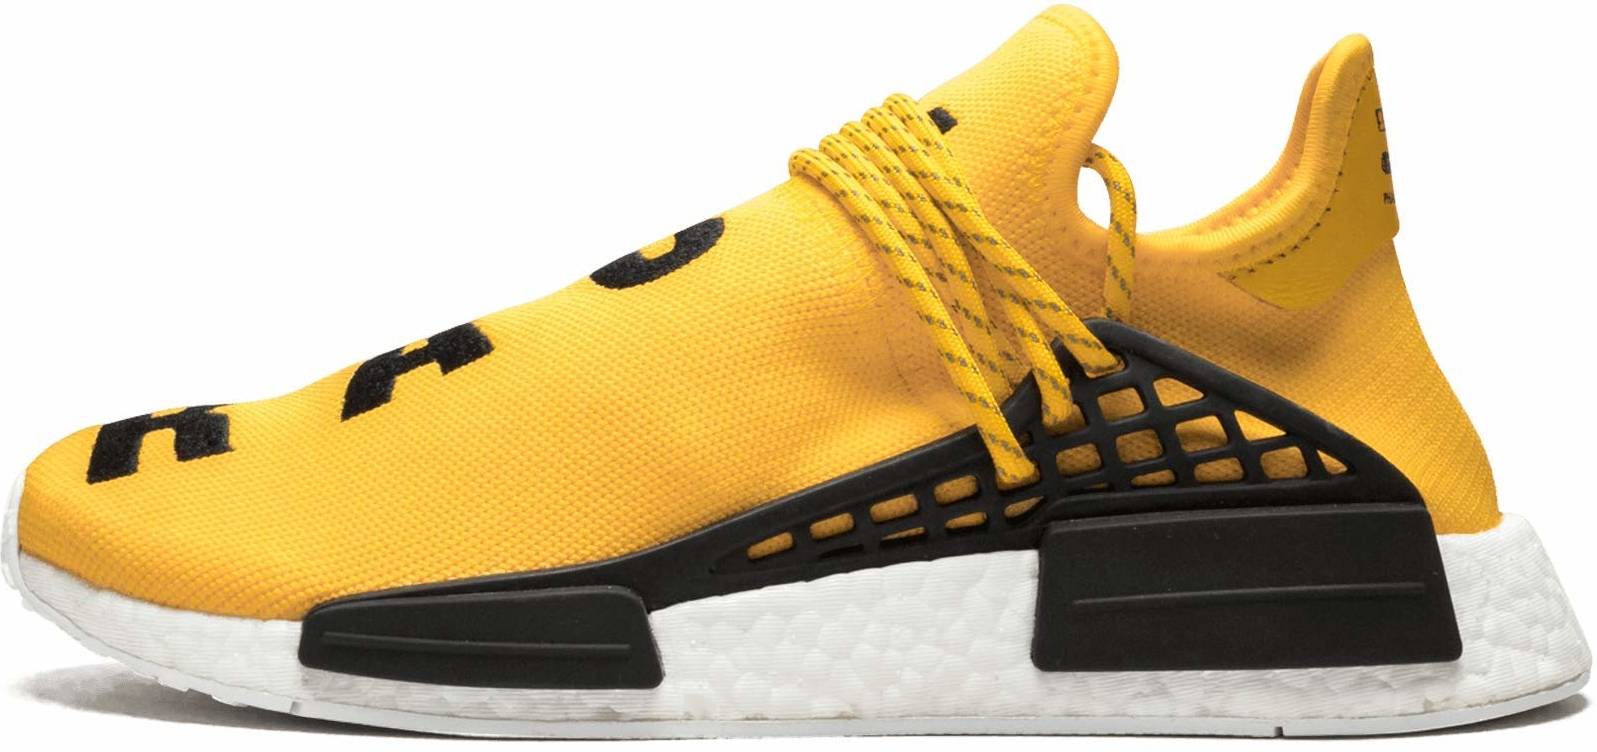 adidas x pharrell williams human race sneakers - OFF-70% >Free Delivery